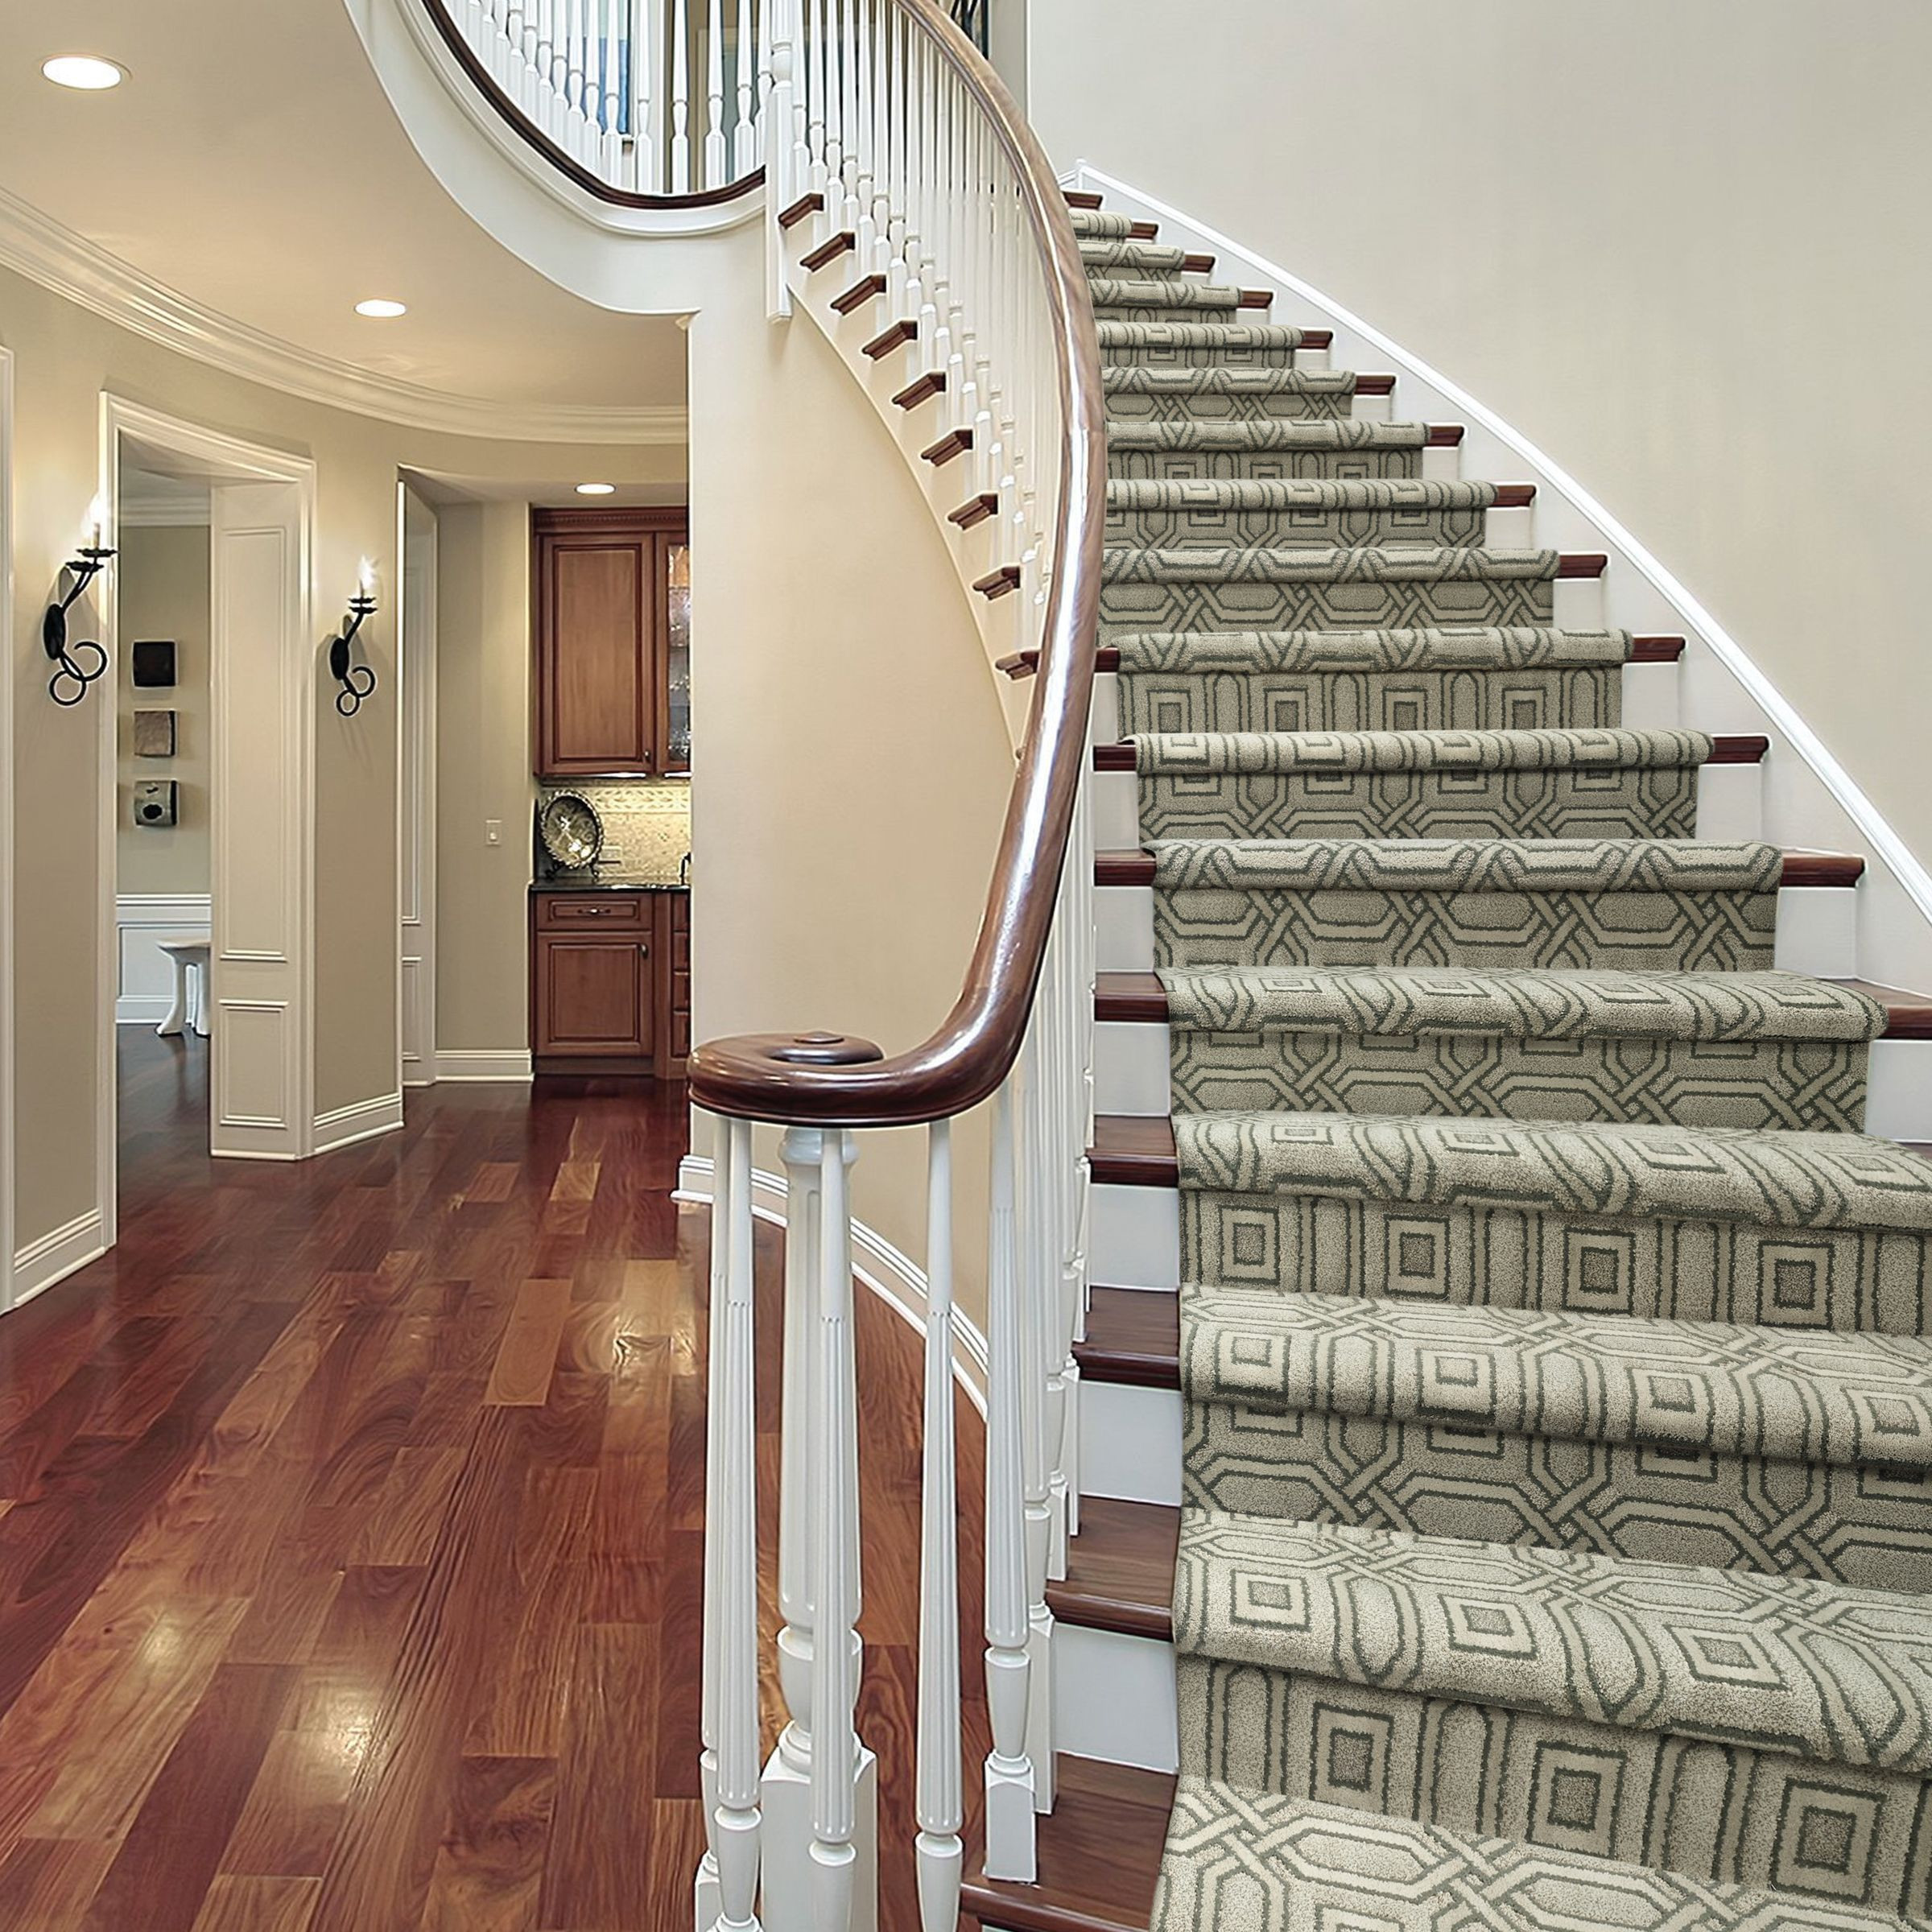 15 Perfect Rugs and Hardwood Floors 2024 free download rugs and hardwood floors of tuftex pavilion tuftex stanton stairways pinterest pavilion with tuftex pavilion hardwood floors stairways rugs on carpet pavilion villa stairs